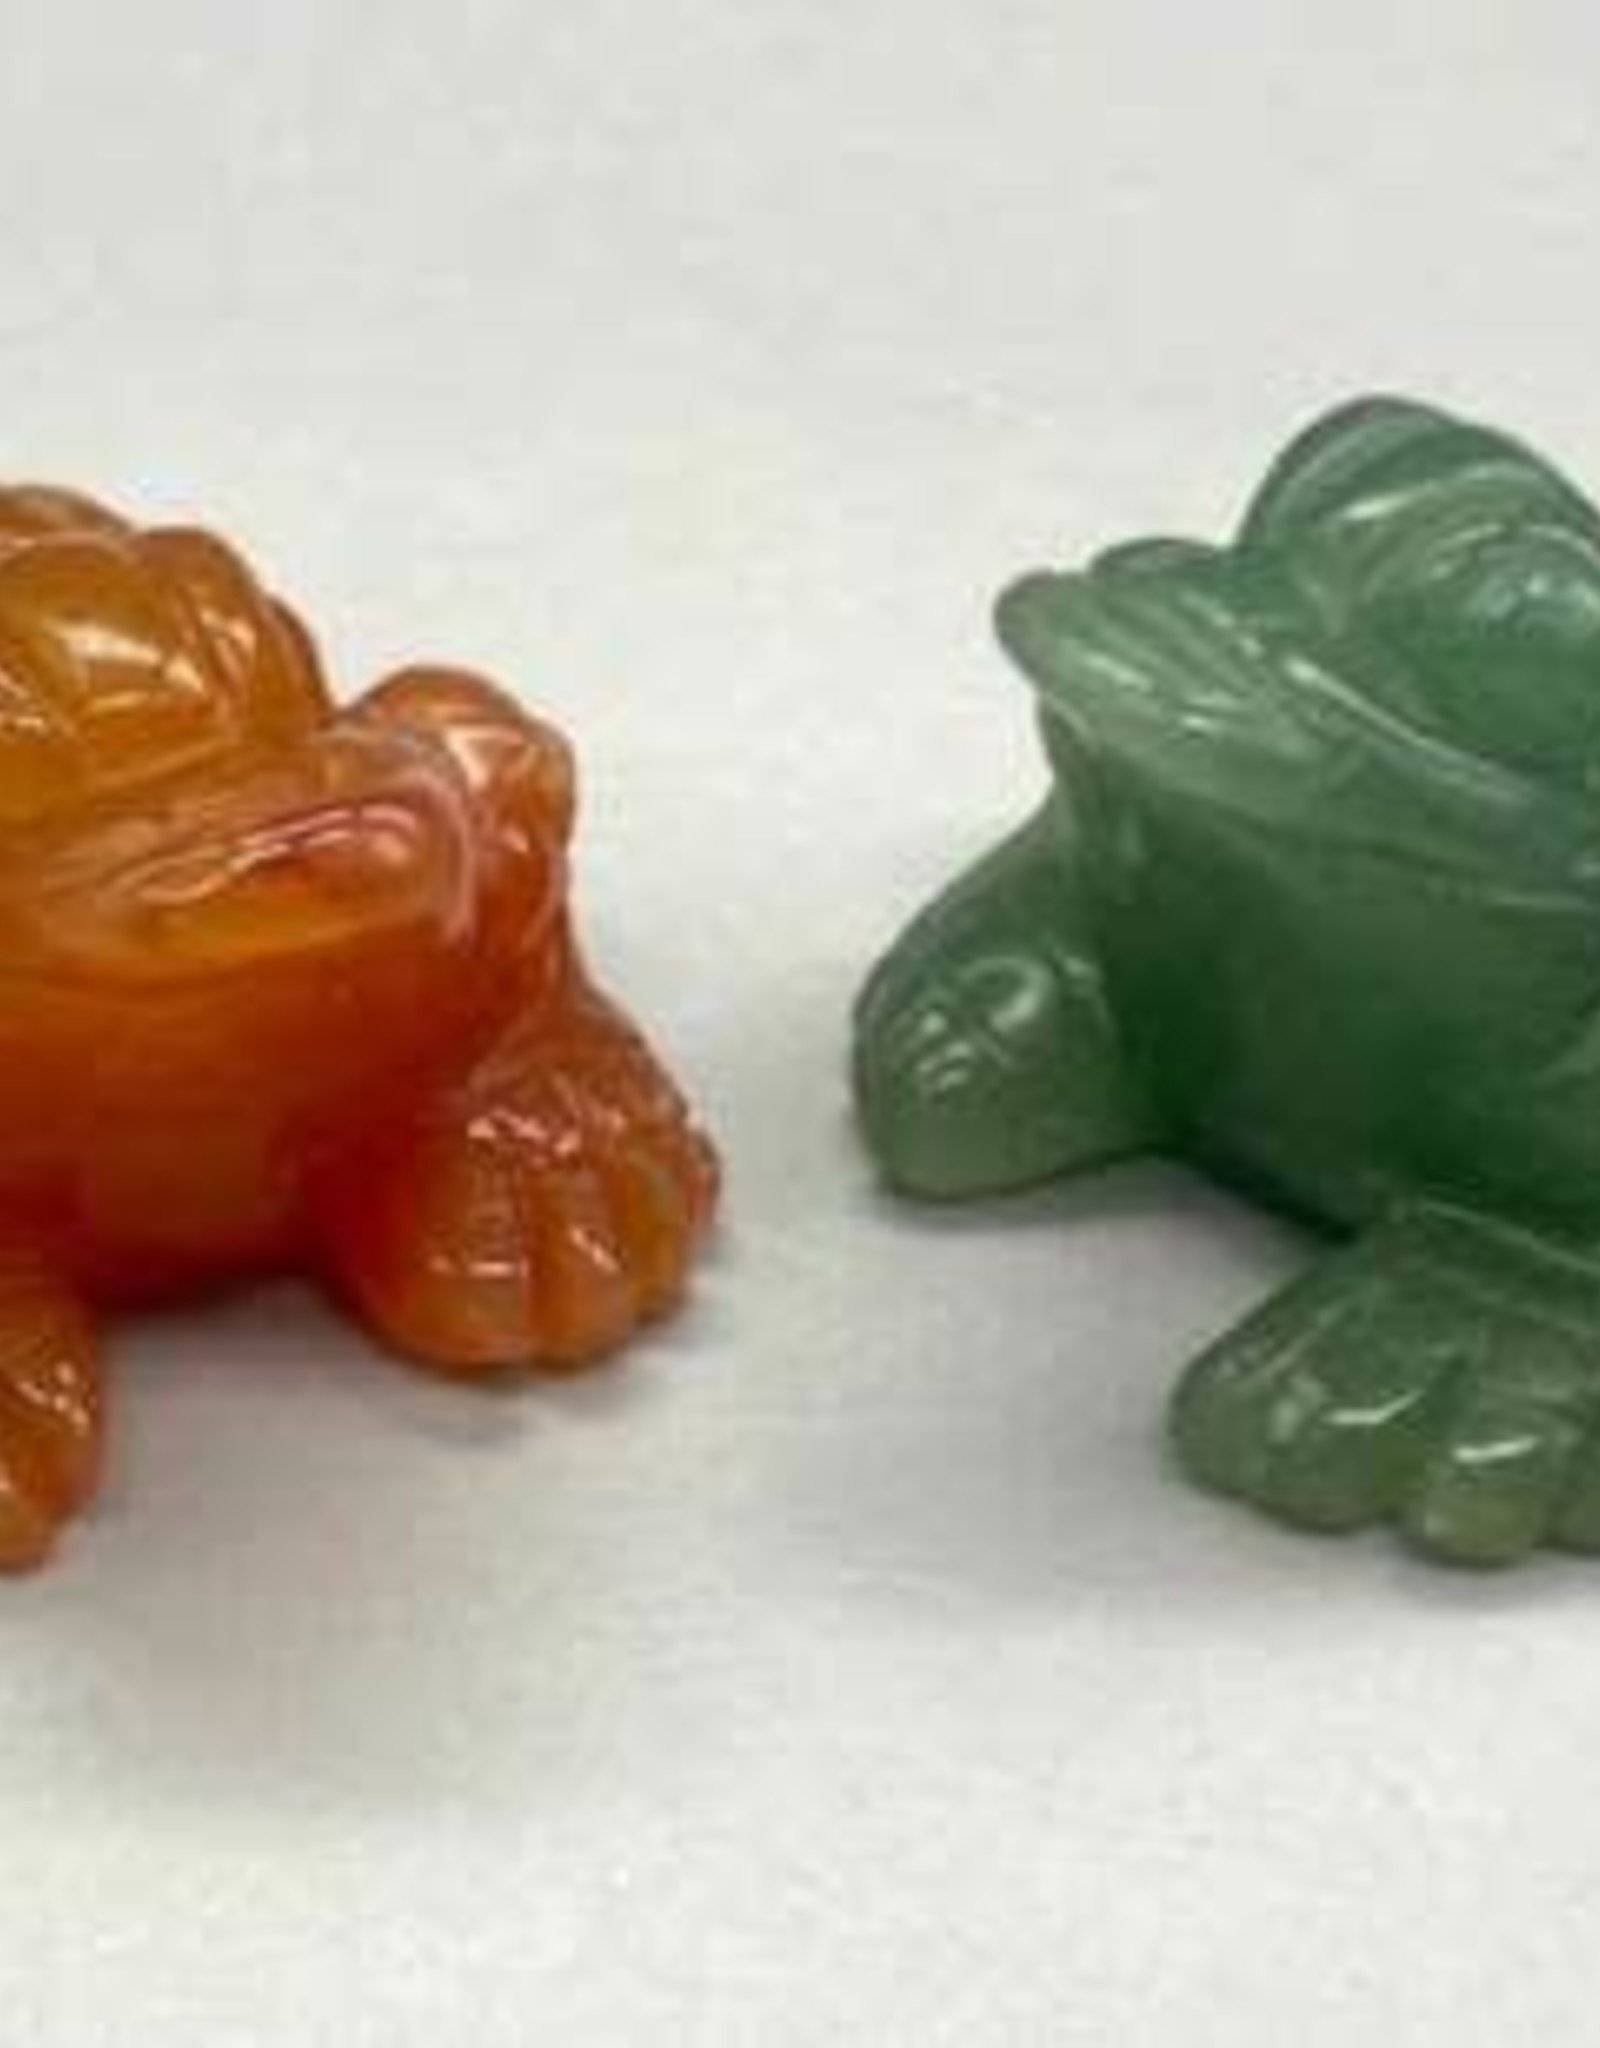 AVENTURINE & RED AGATE - CHINESE FROG Set of 2